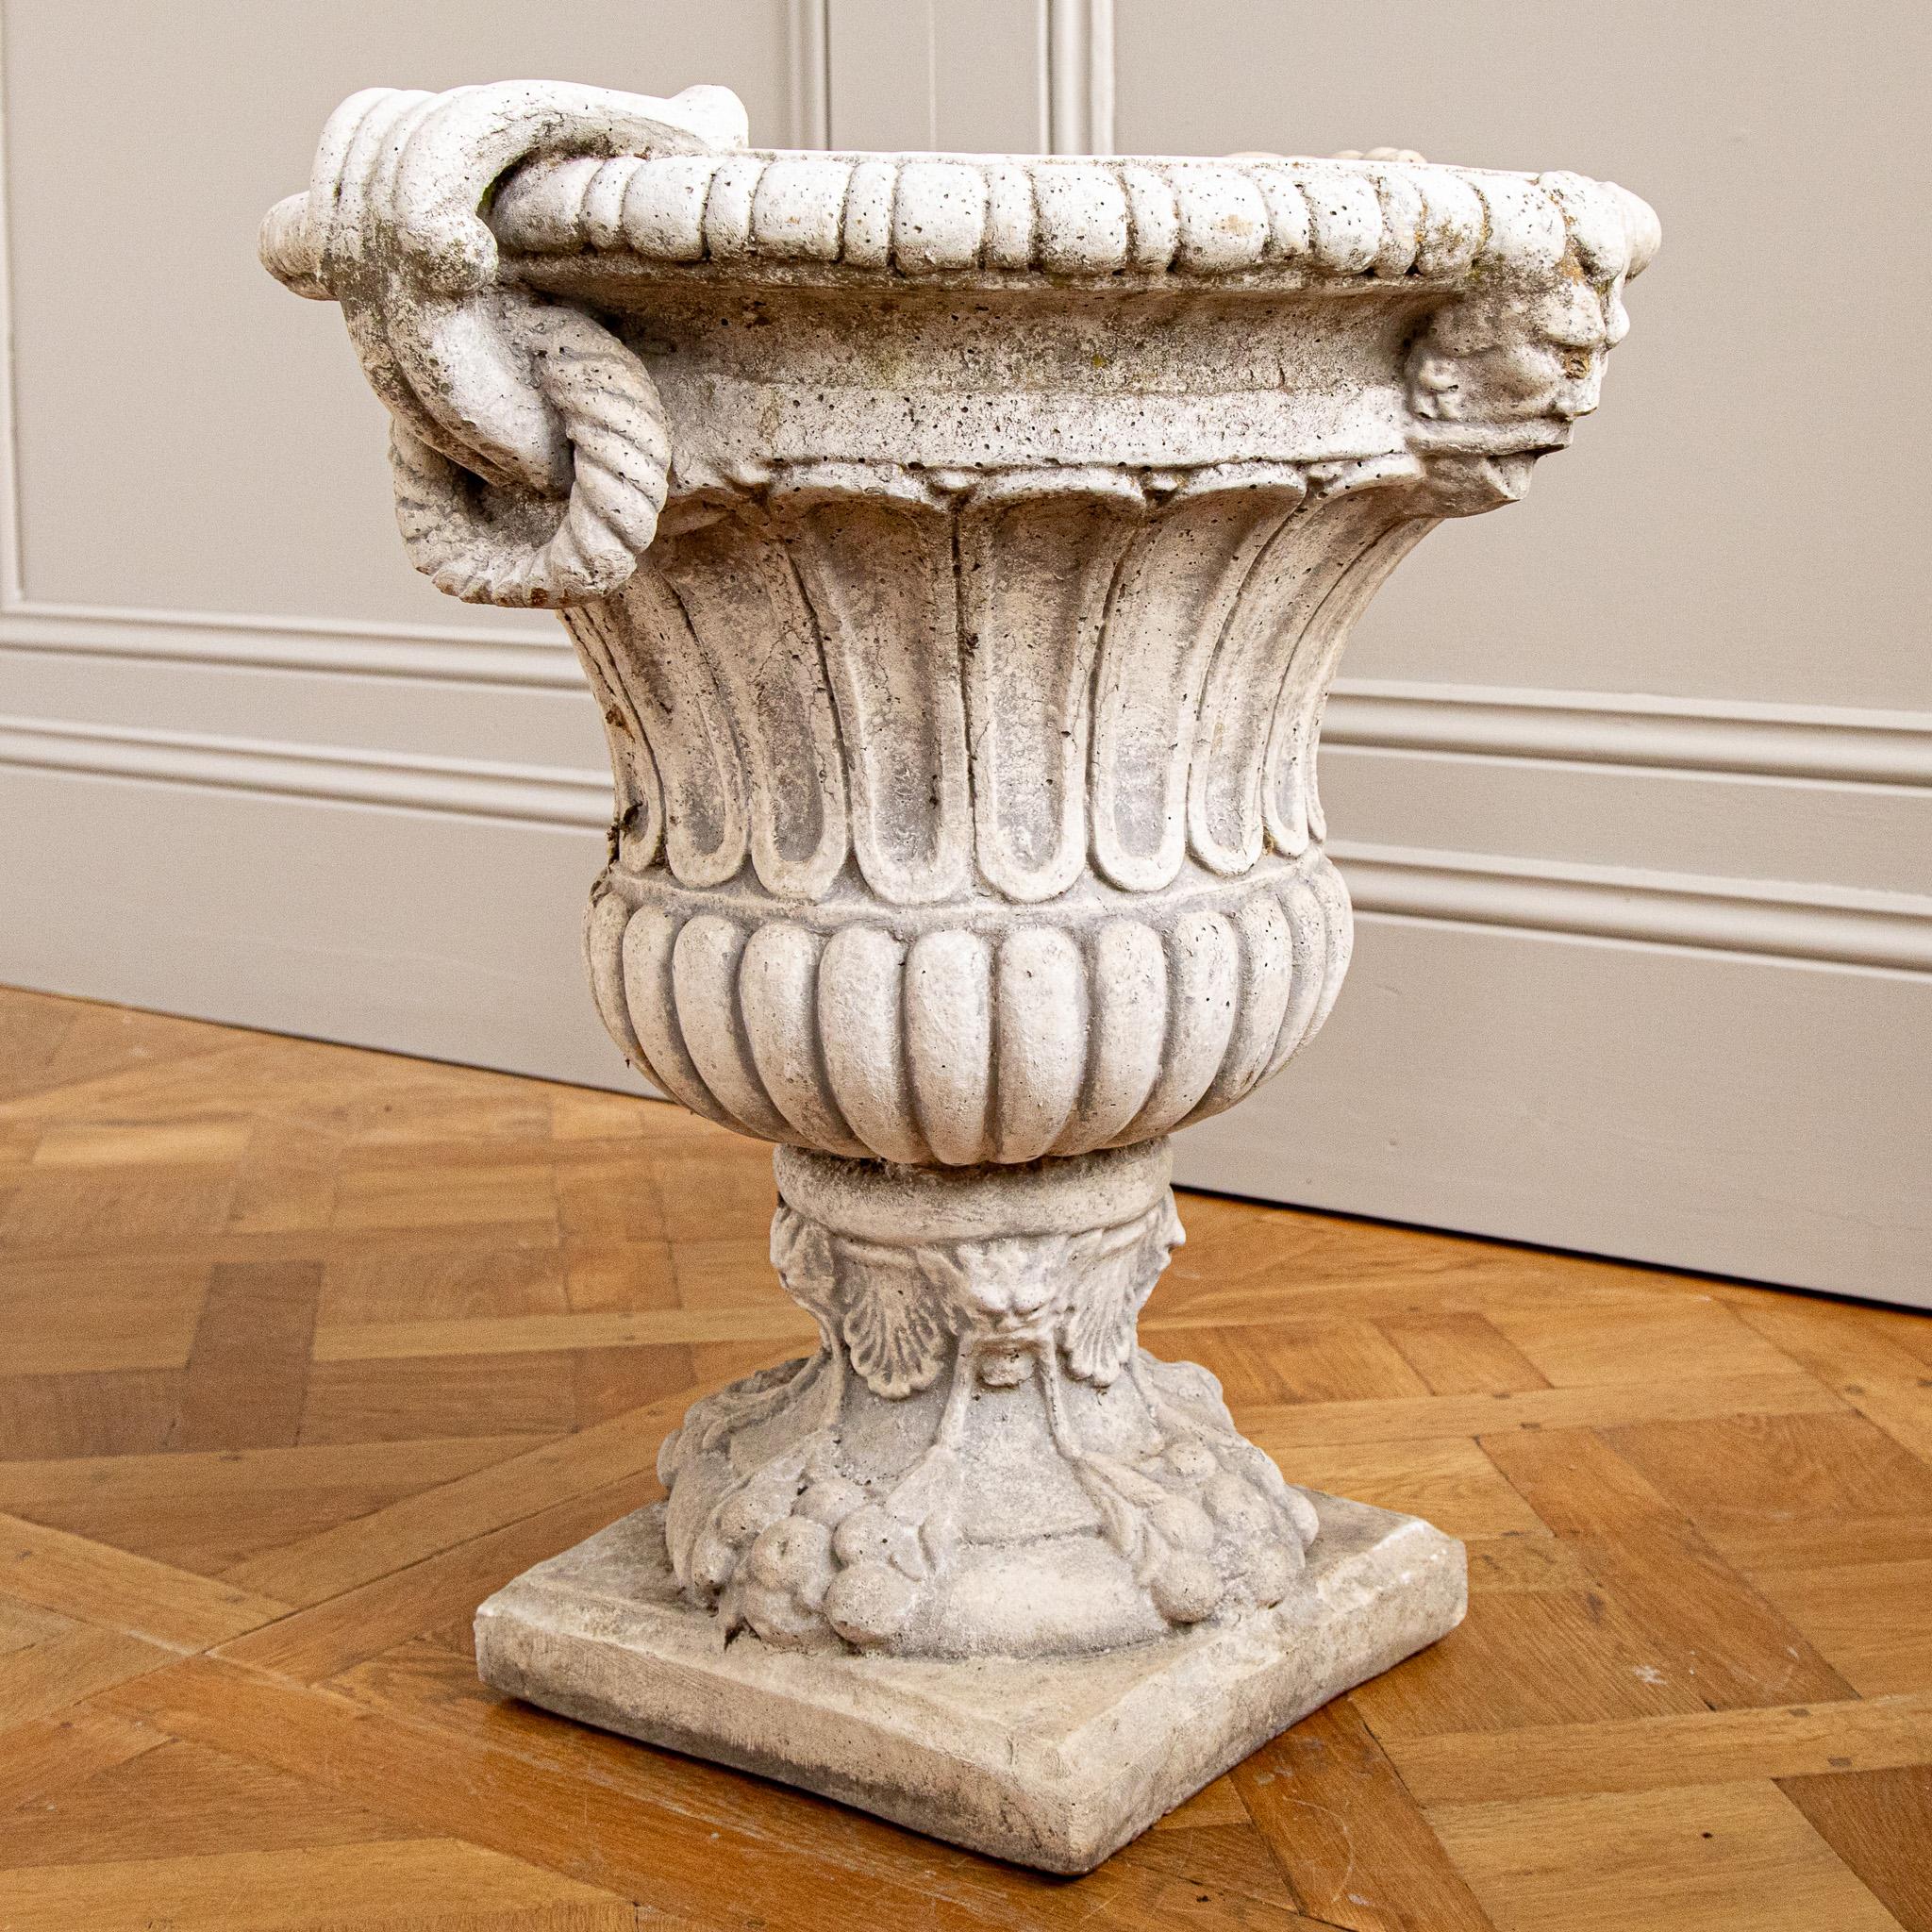 Circa Mid 1900's Set Of 4 Decorative Italian Garden Urns In Reconstituted Stone For Sale 1